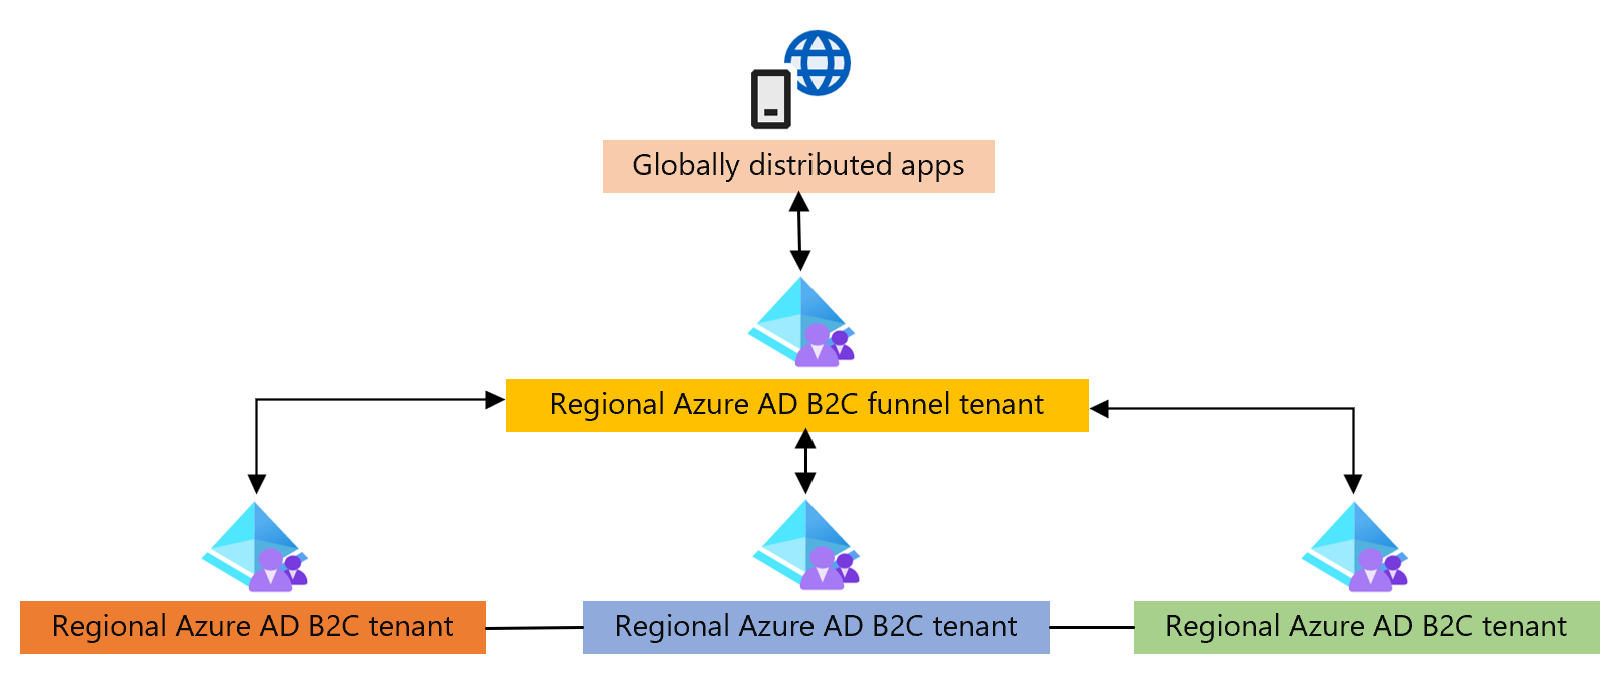 Funnel tenant orchestration